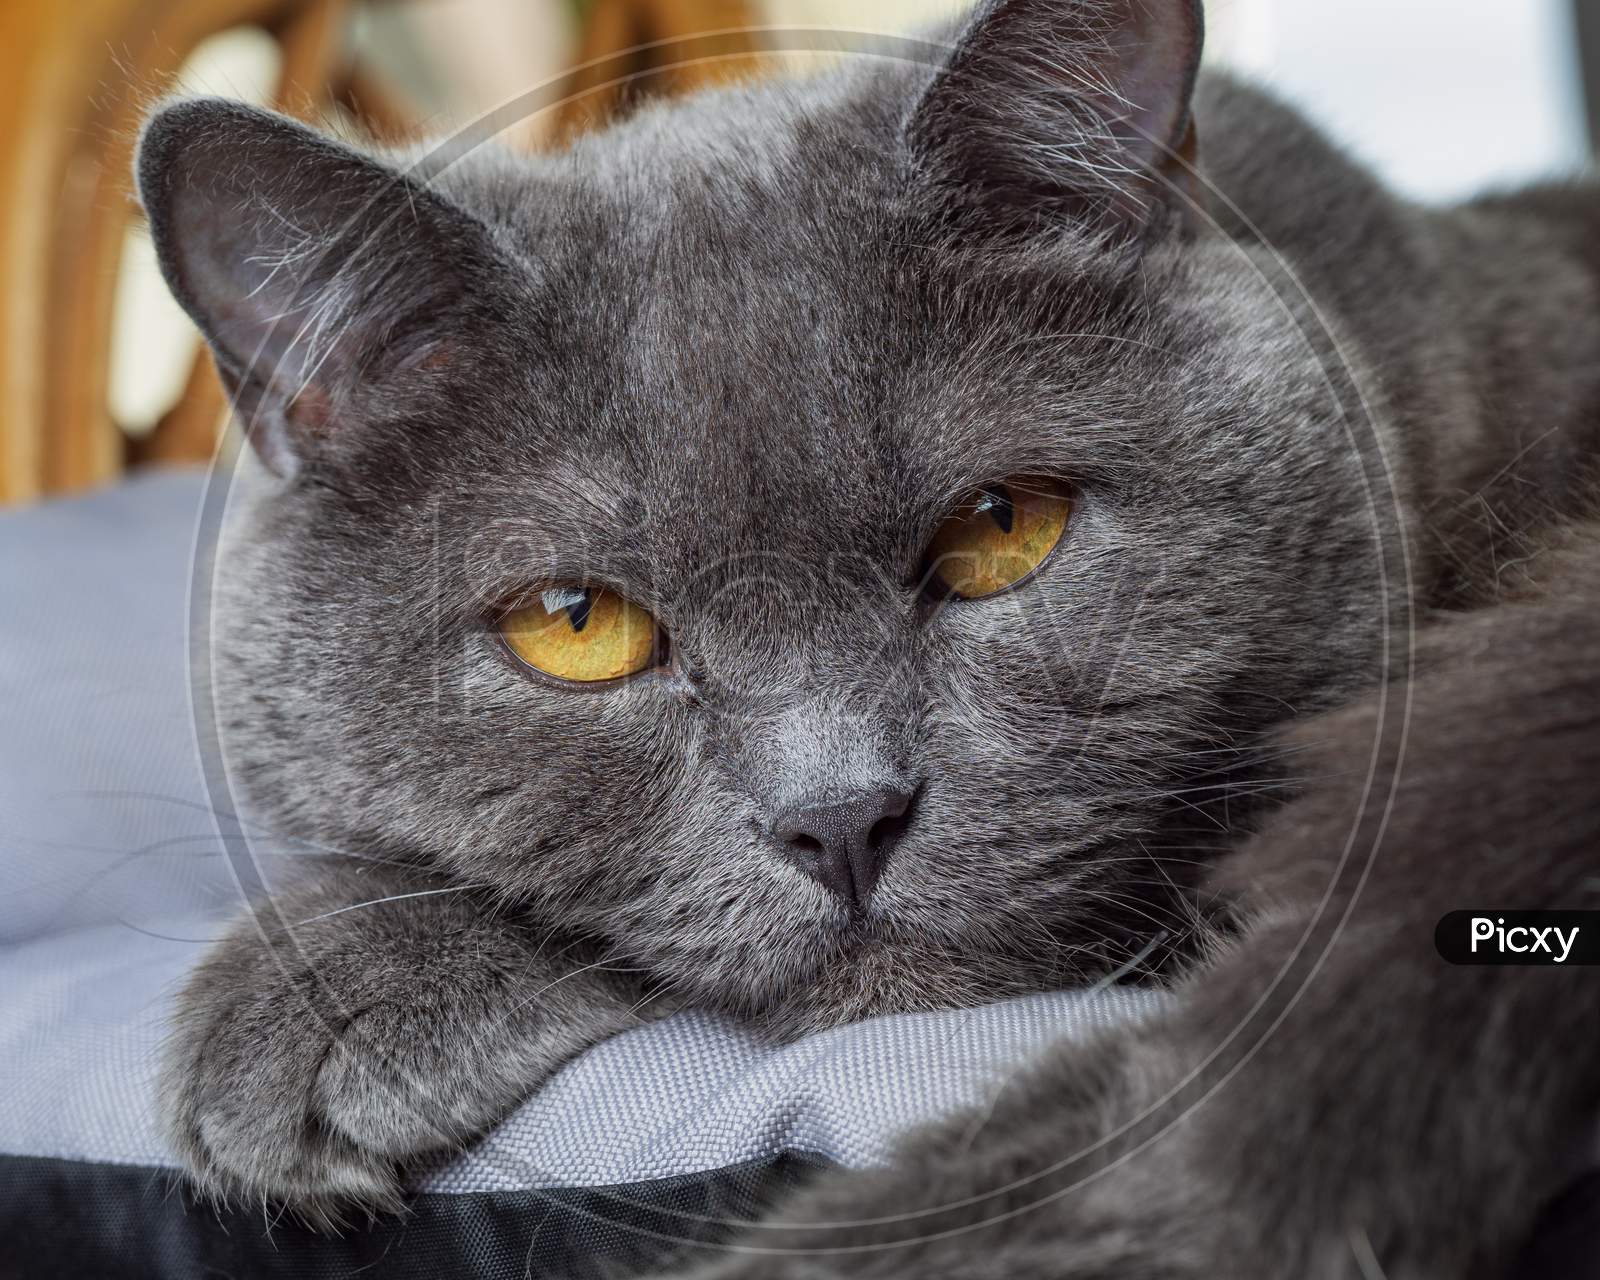 Close-Up Of The British Shorthair Cat With Amber Colored Eyes And Blue Coat.